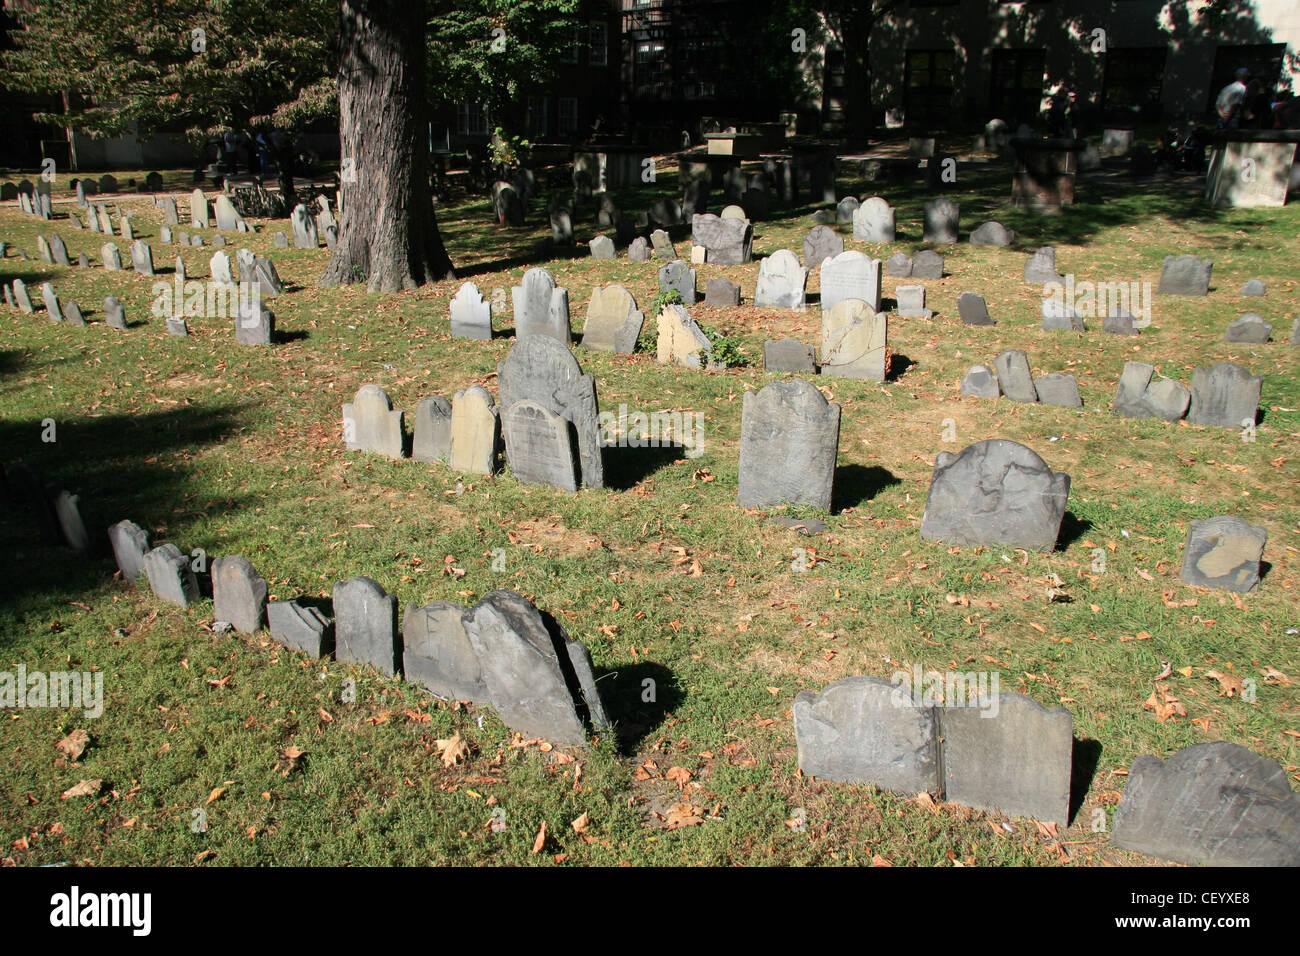 View of graves in the Old Granary Burying Ground in Boston, Massachusetts, United States. Stock Photo